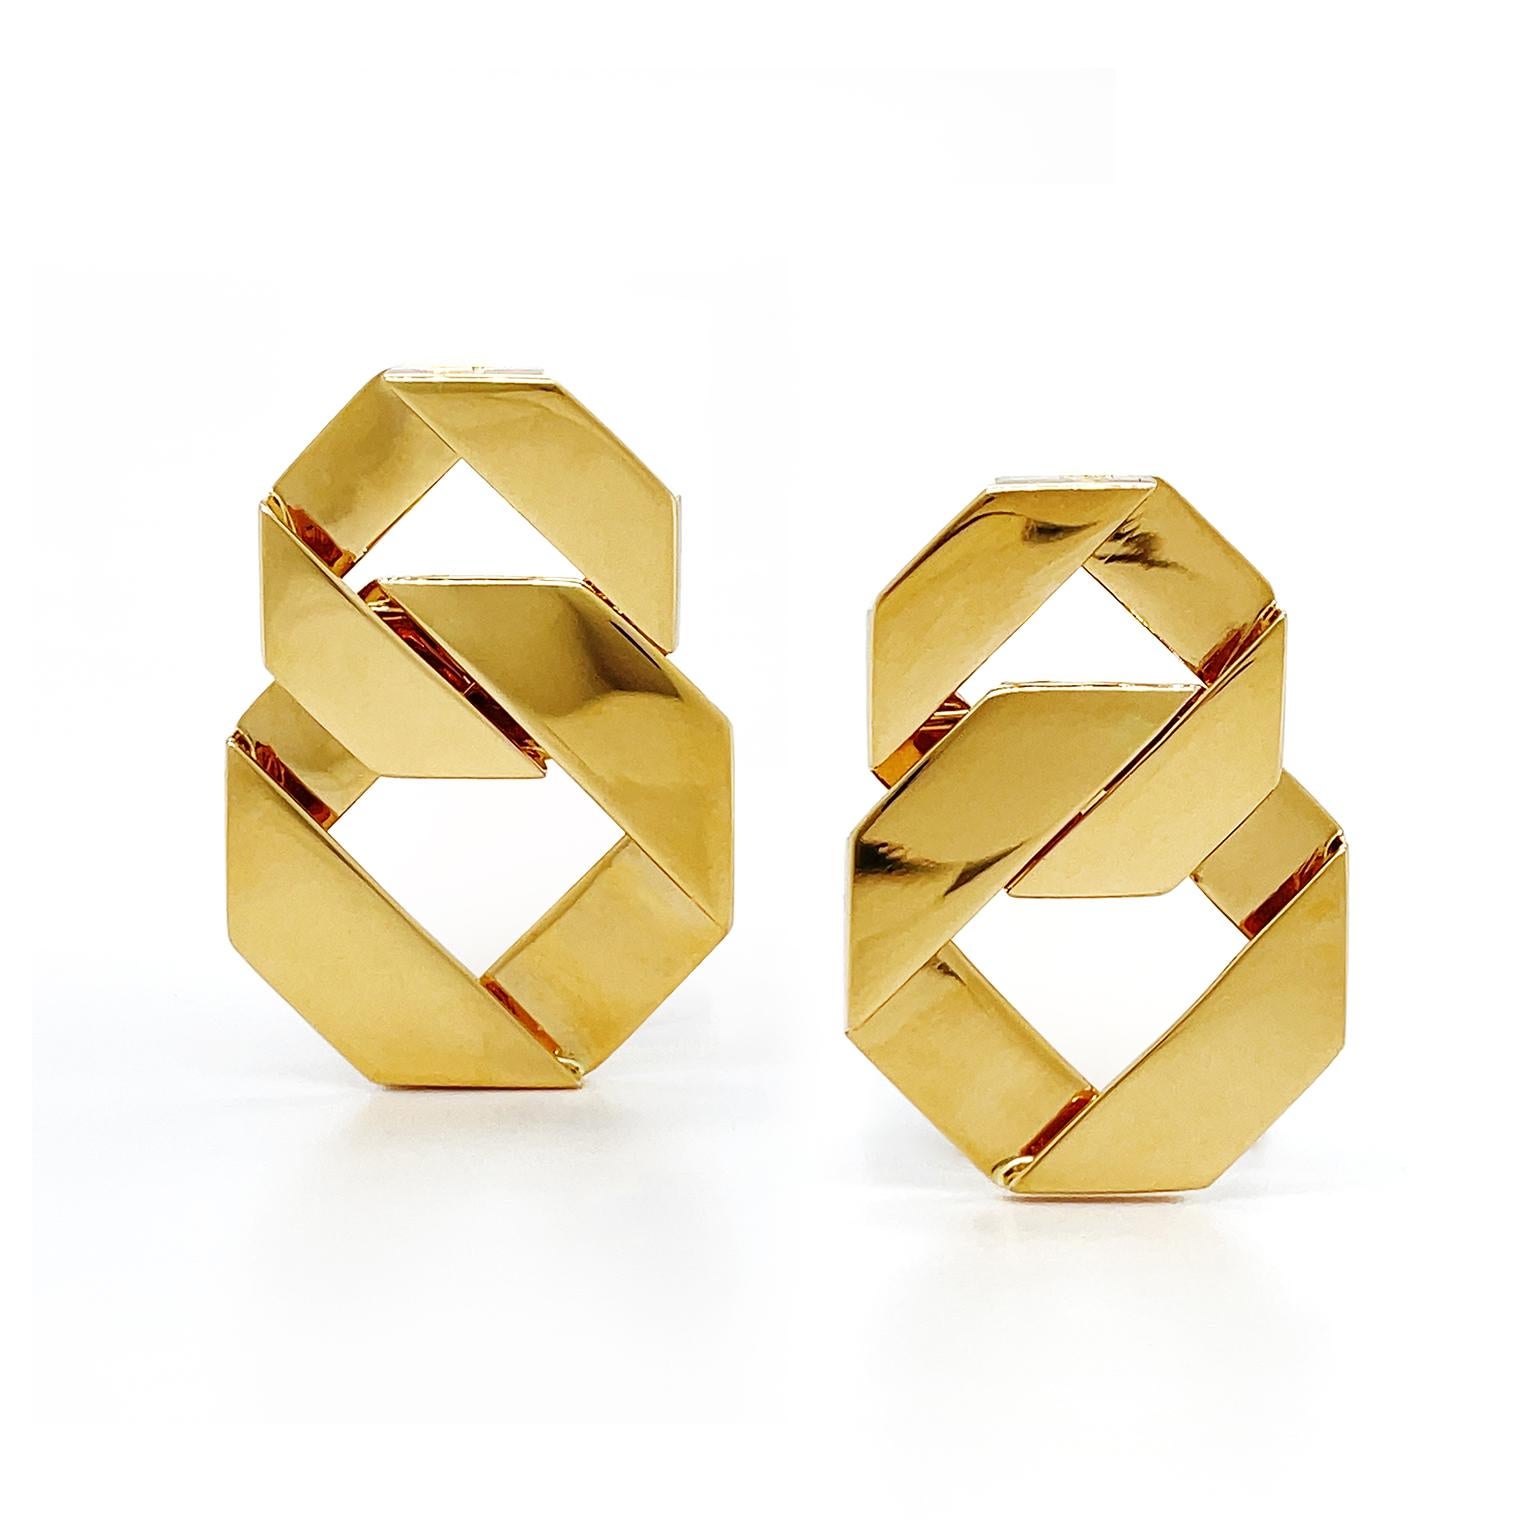 The sophisticated incorporation of geometric shapes creates a modern design. An enclosed 18k yellow-gold ribbon is folded to form an octagon. Interlocked is a larger ribbon of octagon, which descends below. The metal is given a satin finish for a